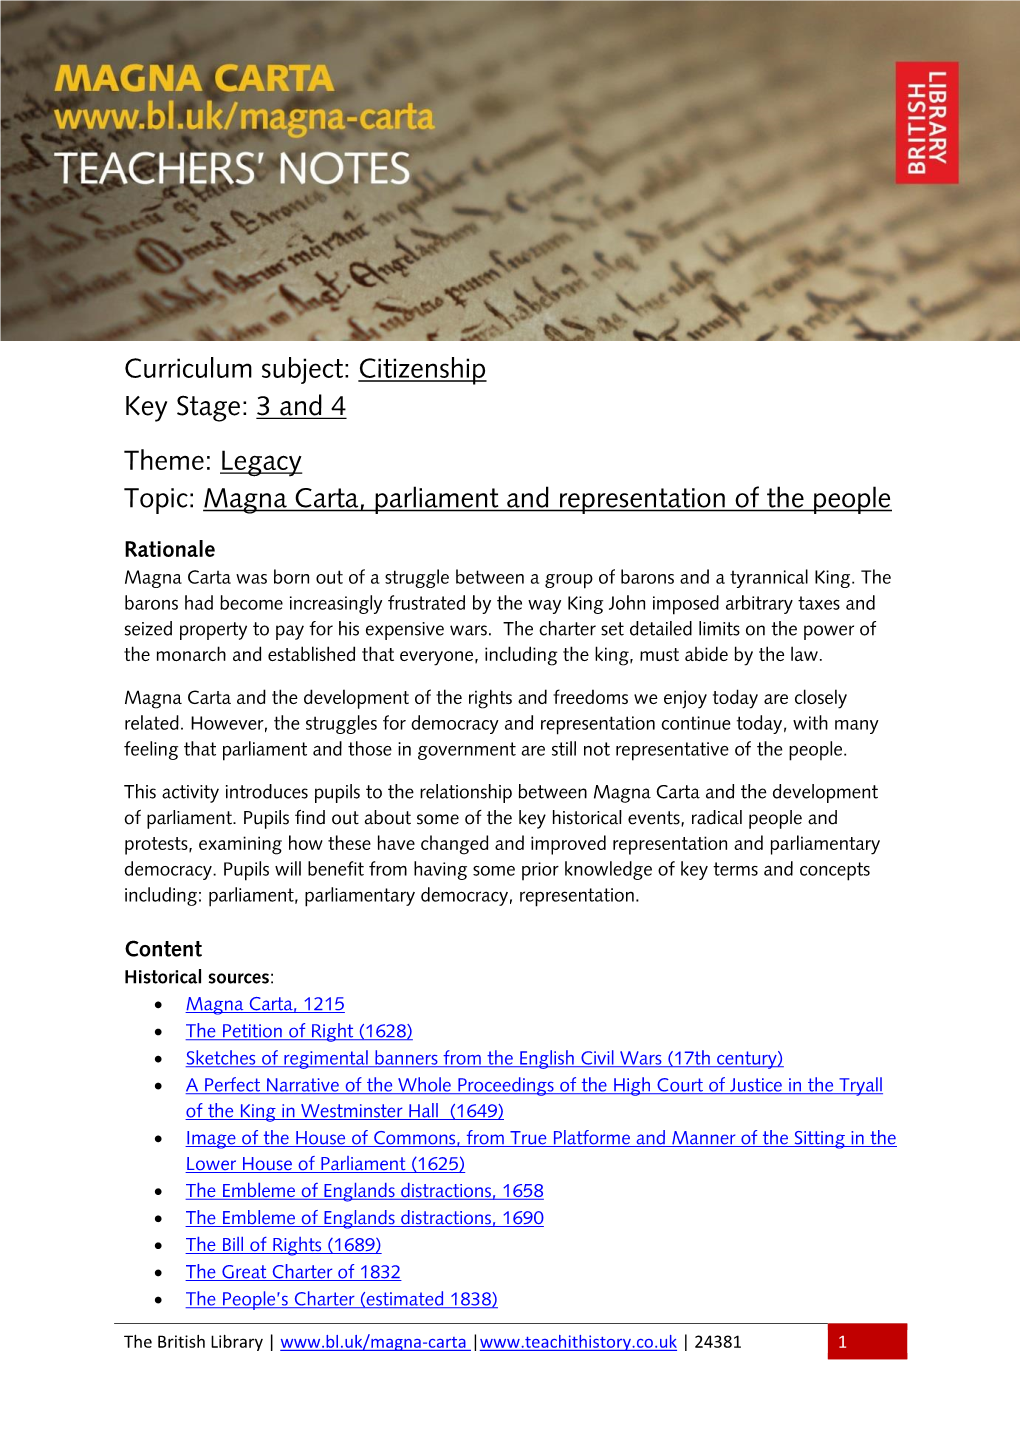 Magna Carta, Parliament and Representation of the People